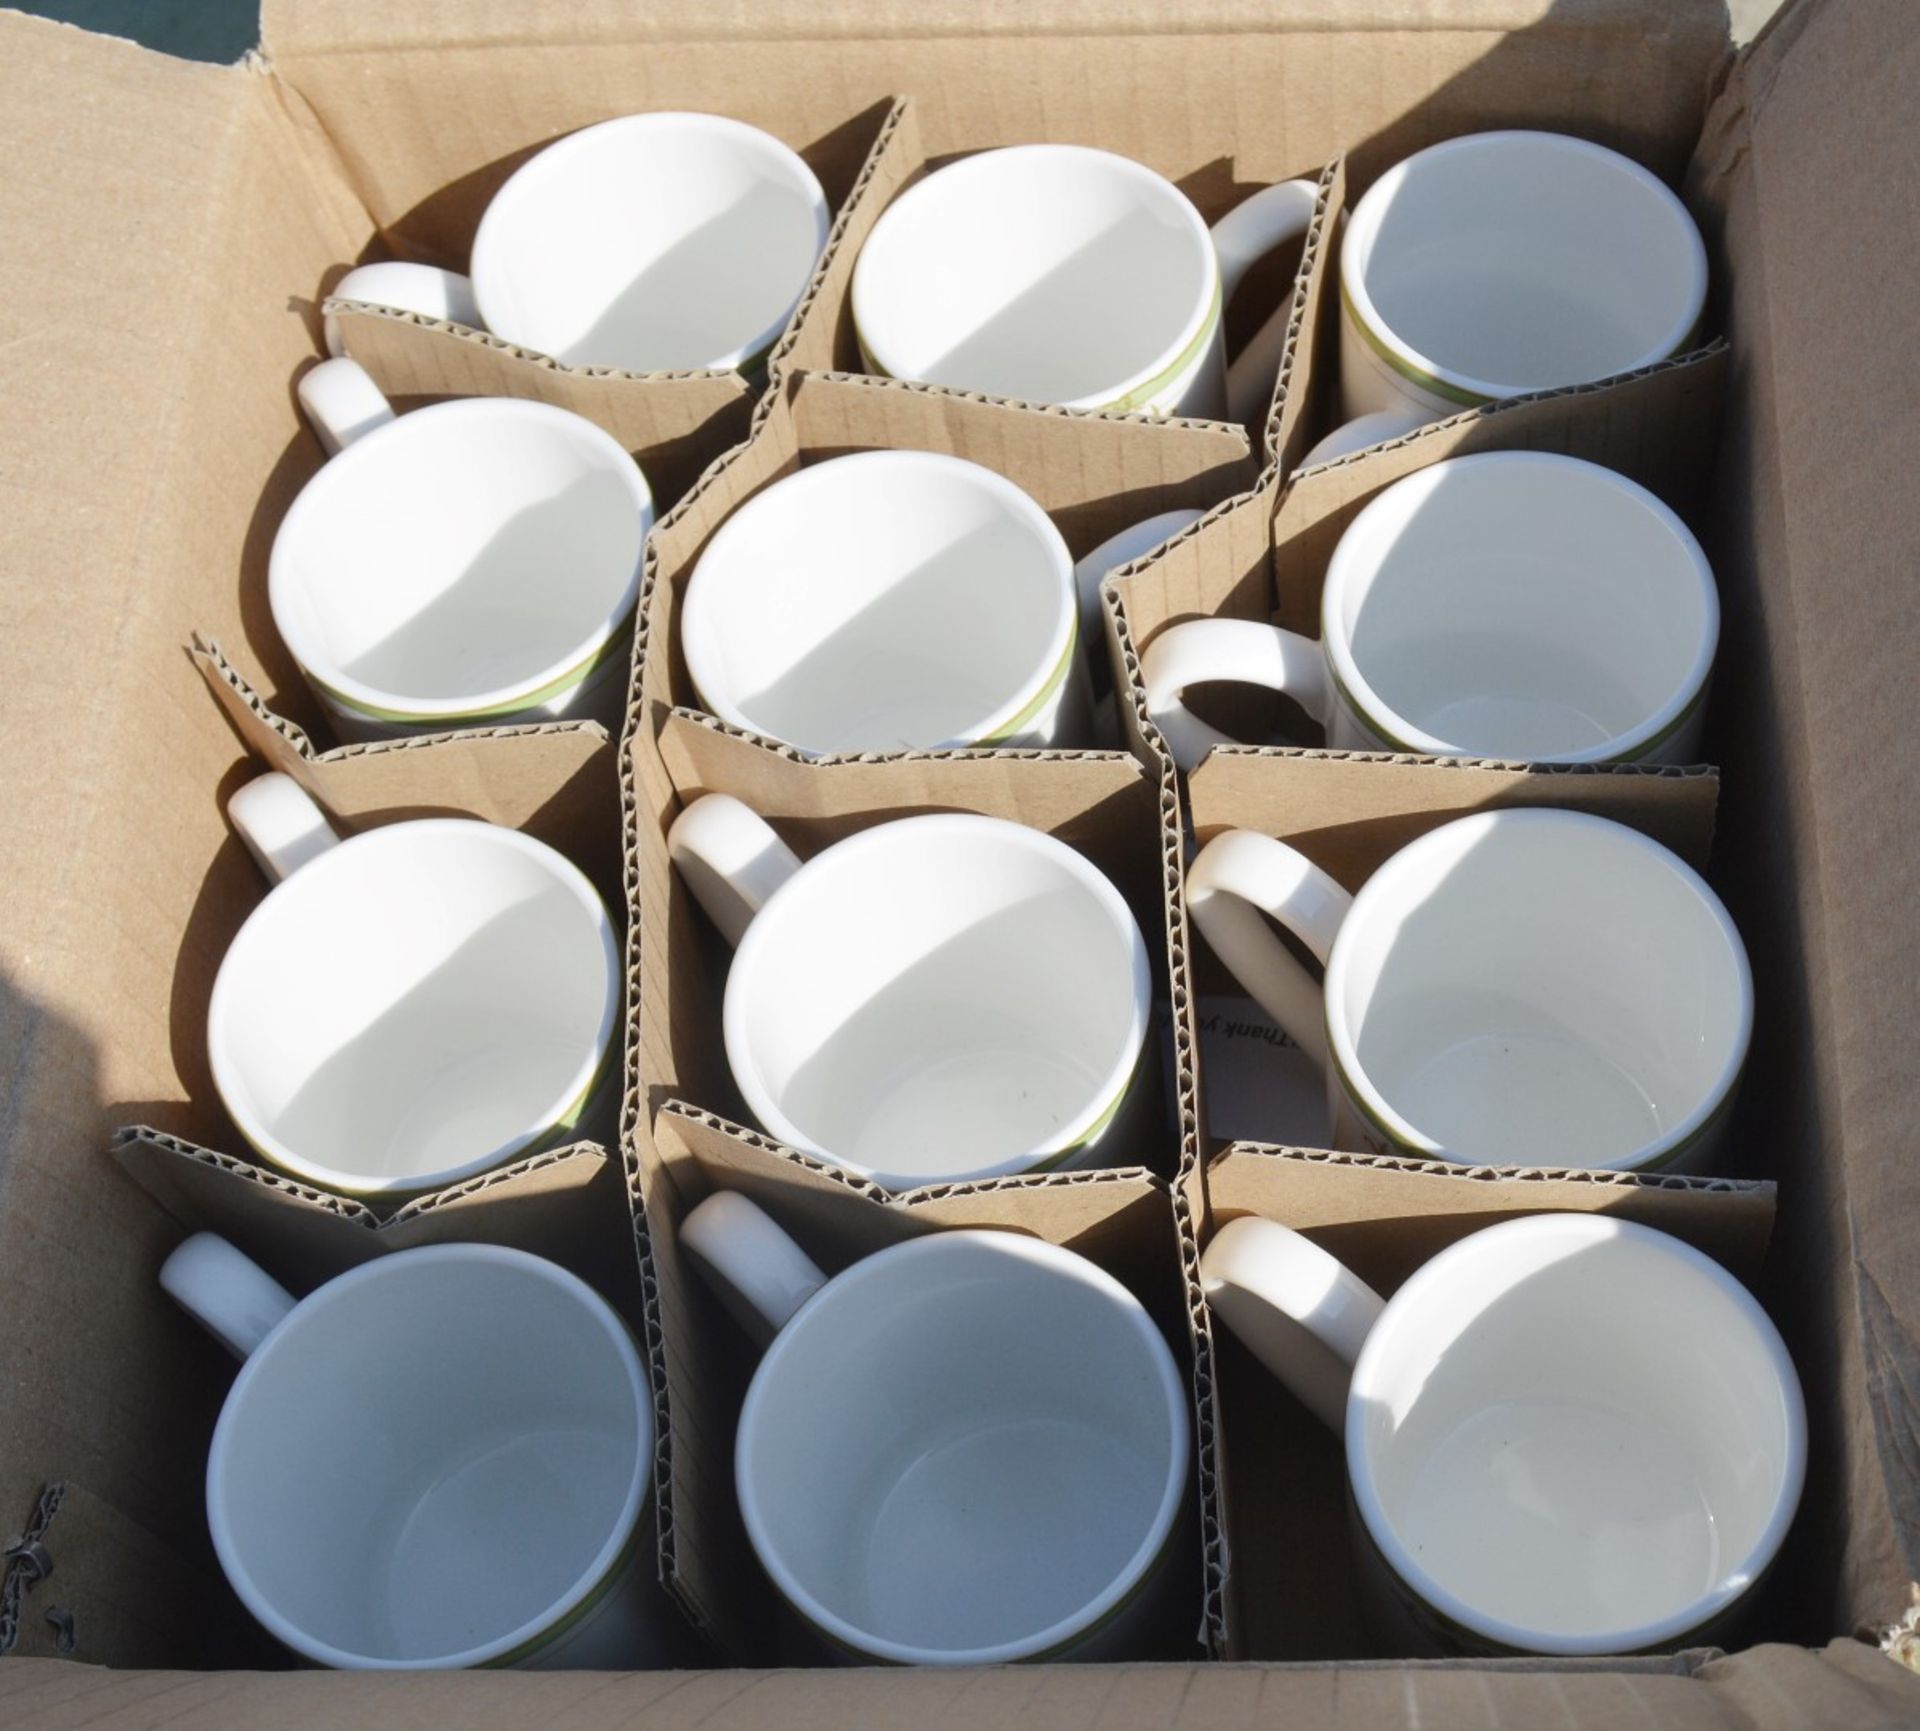 36 x DUDSON Fine China 'Georgian' Milk Cups With 'Famous Branding' - 13cl (21WP050G) - Recently - Image 4 of 5